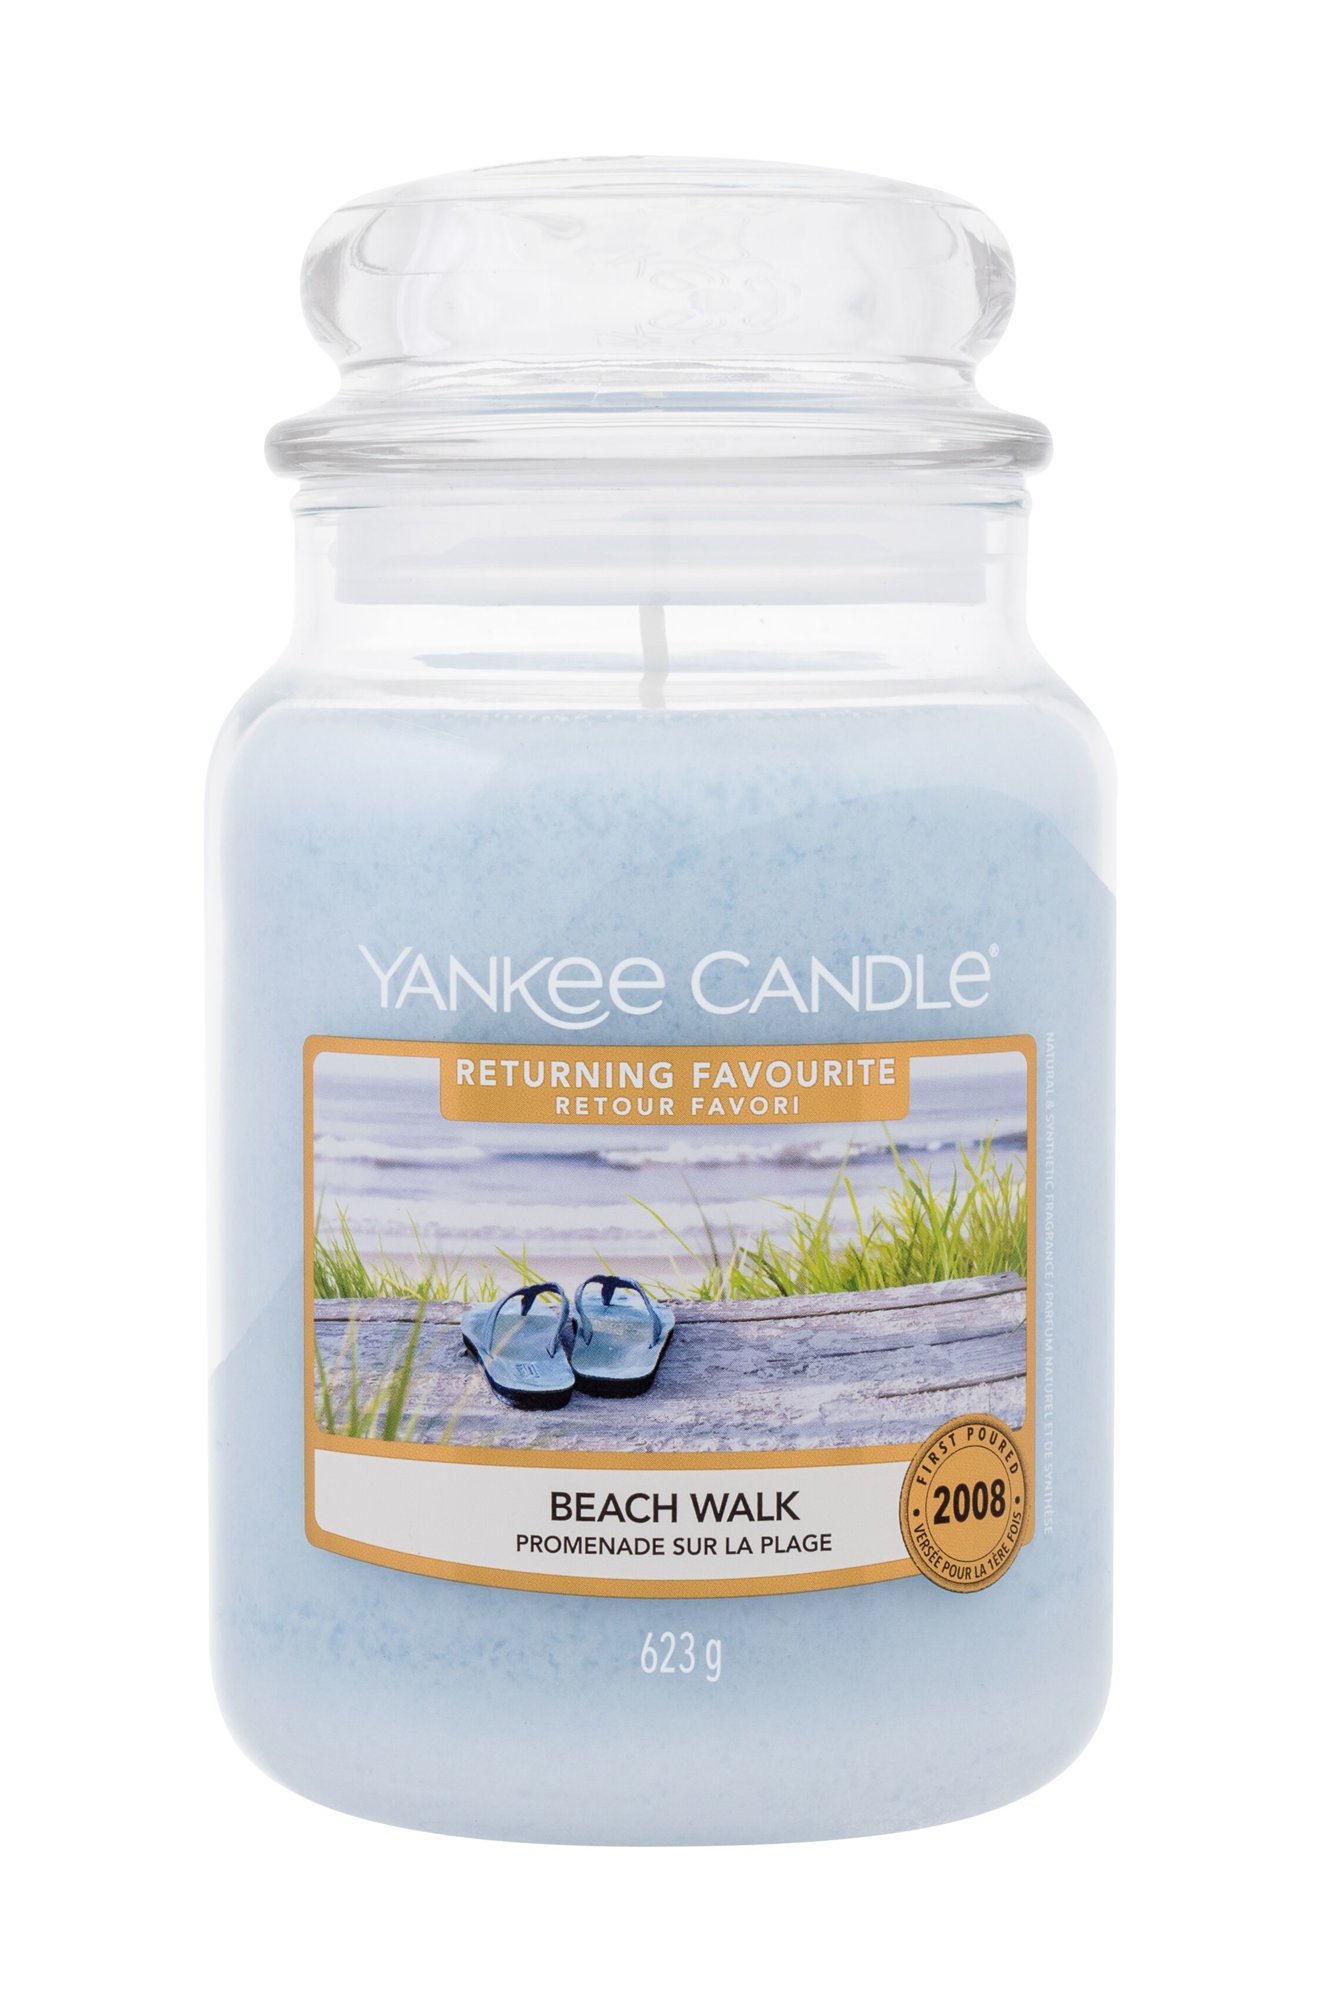 Yankee Candle Beach Walk 623g Kvepalai Unisex Scented Candle